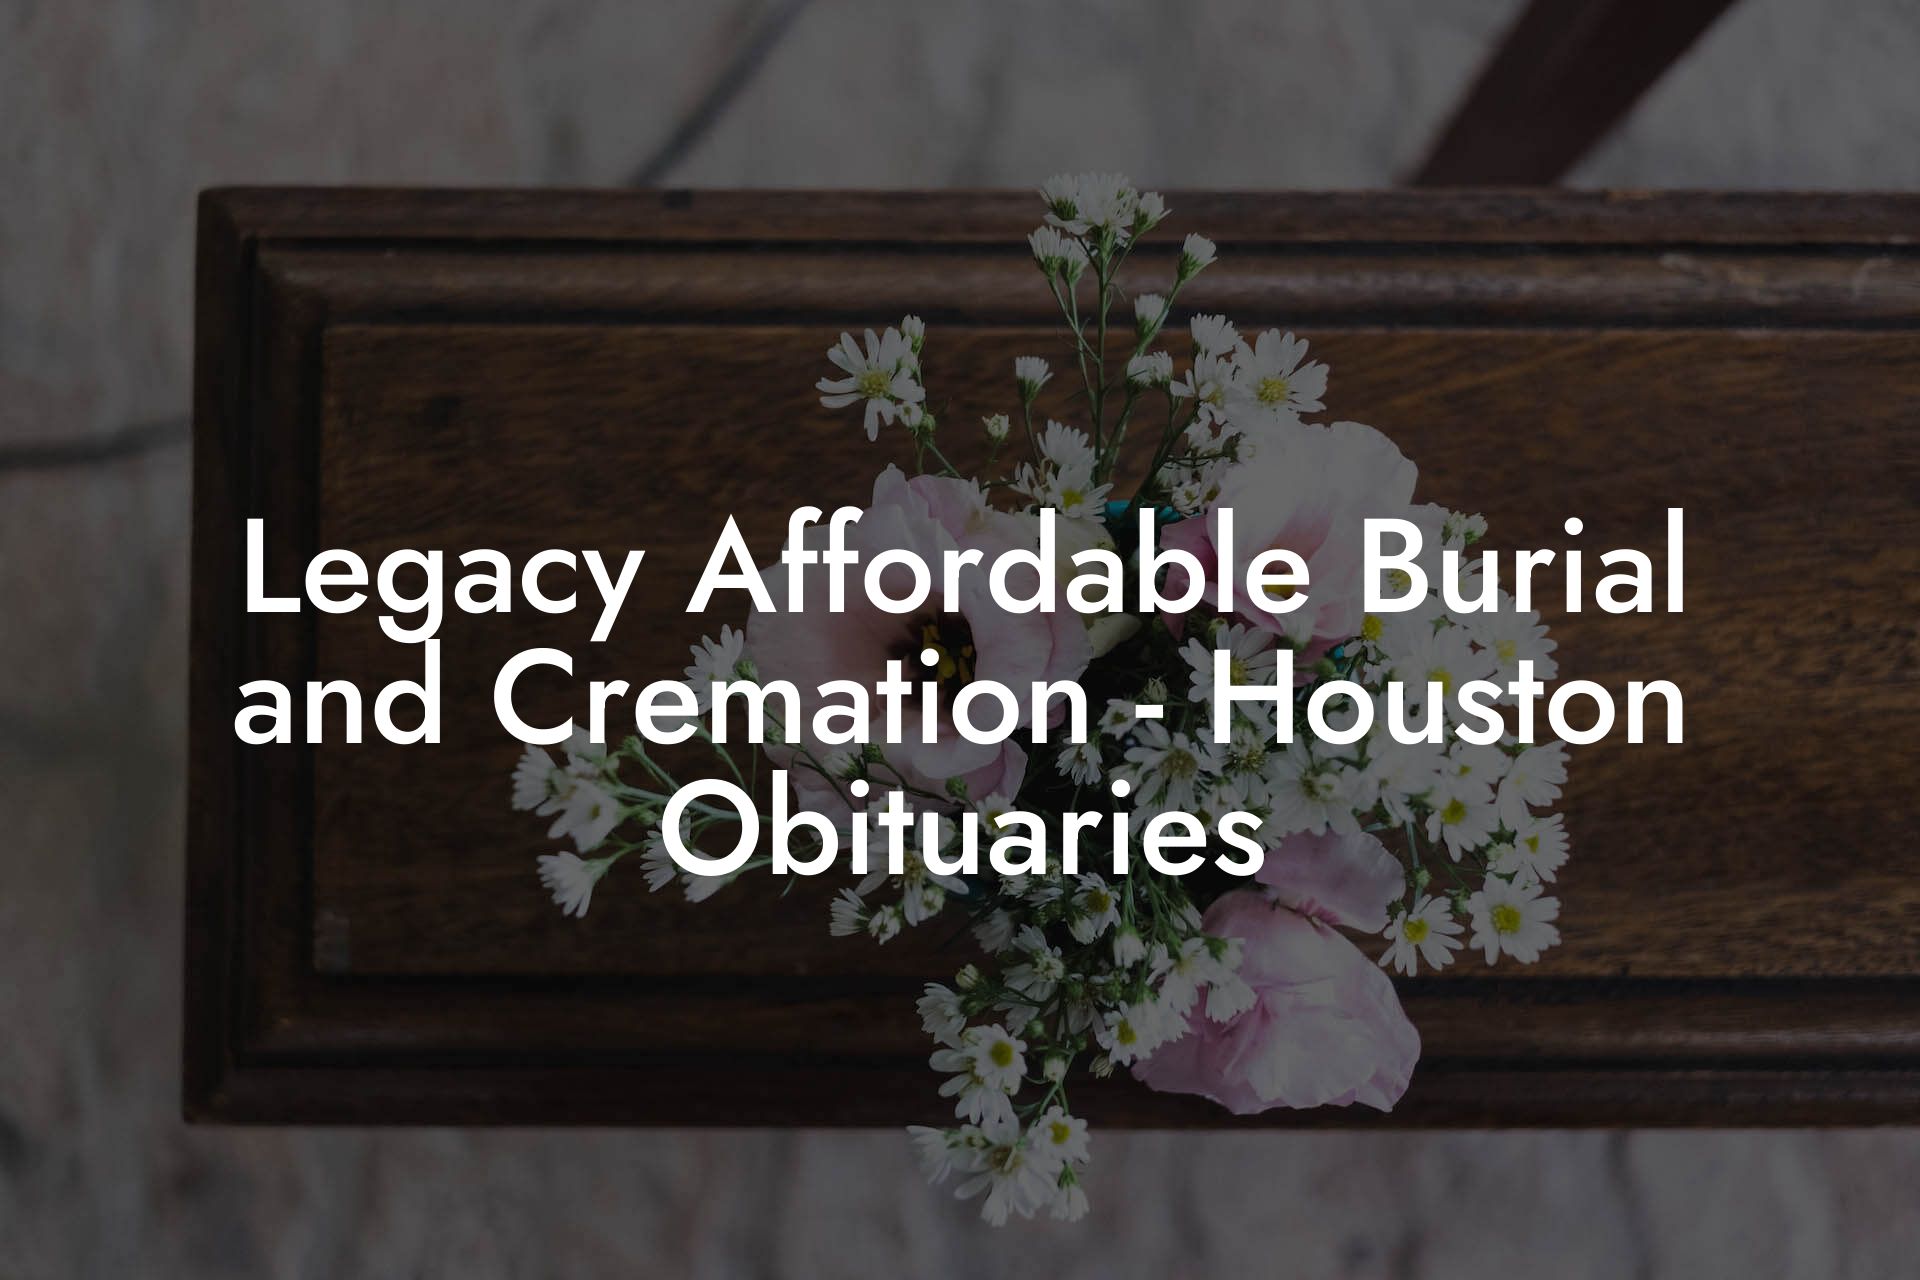 Legacy Affordable Burial and Cremation - Houston Obituaries